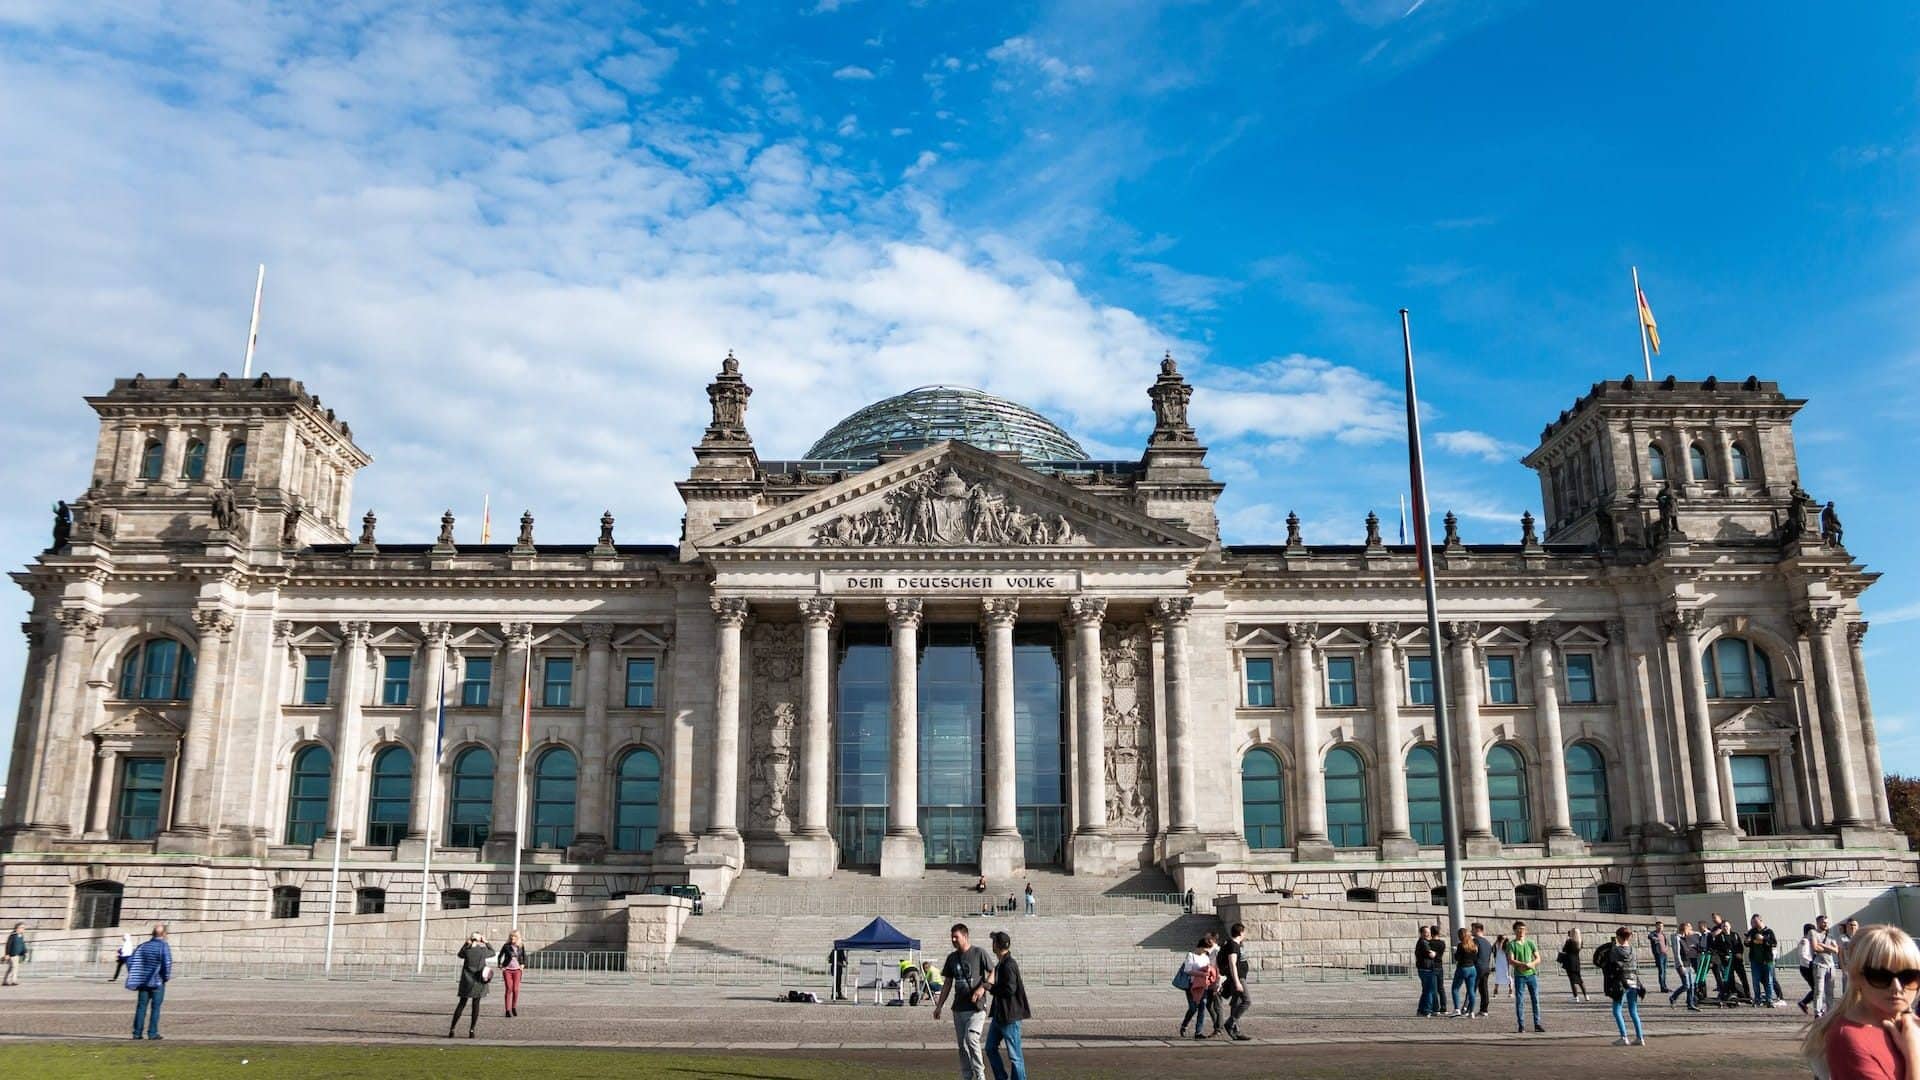 Berlin attractions not to miss on a first visit - Reichstag Building